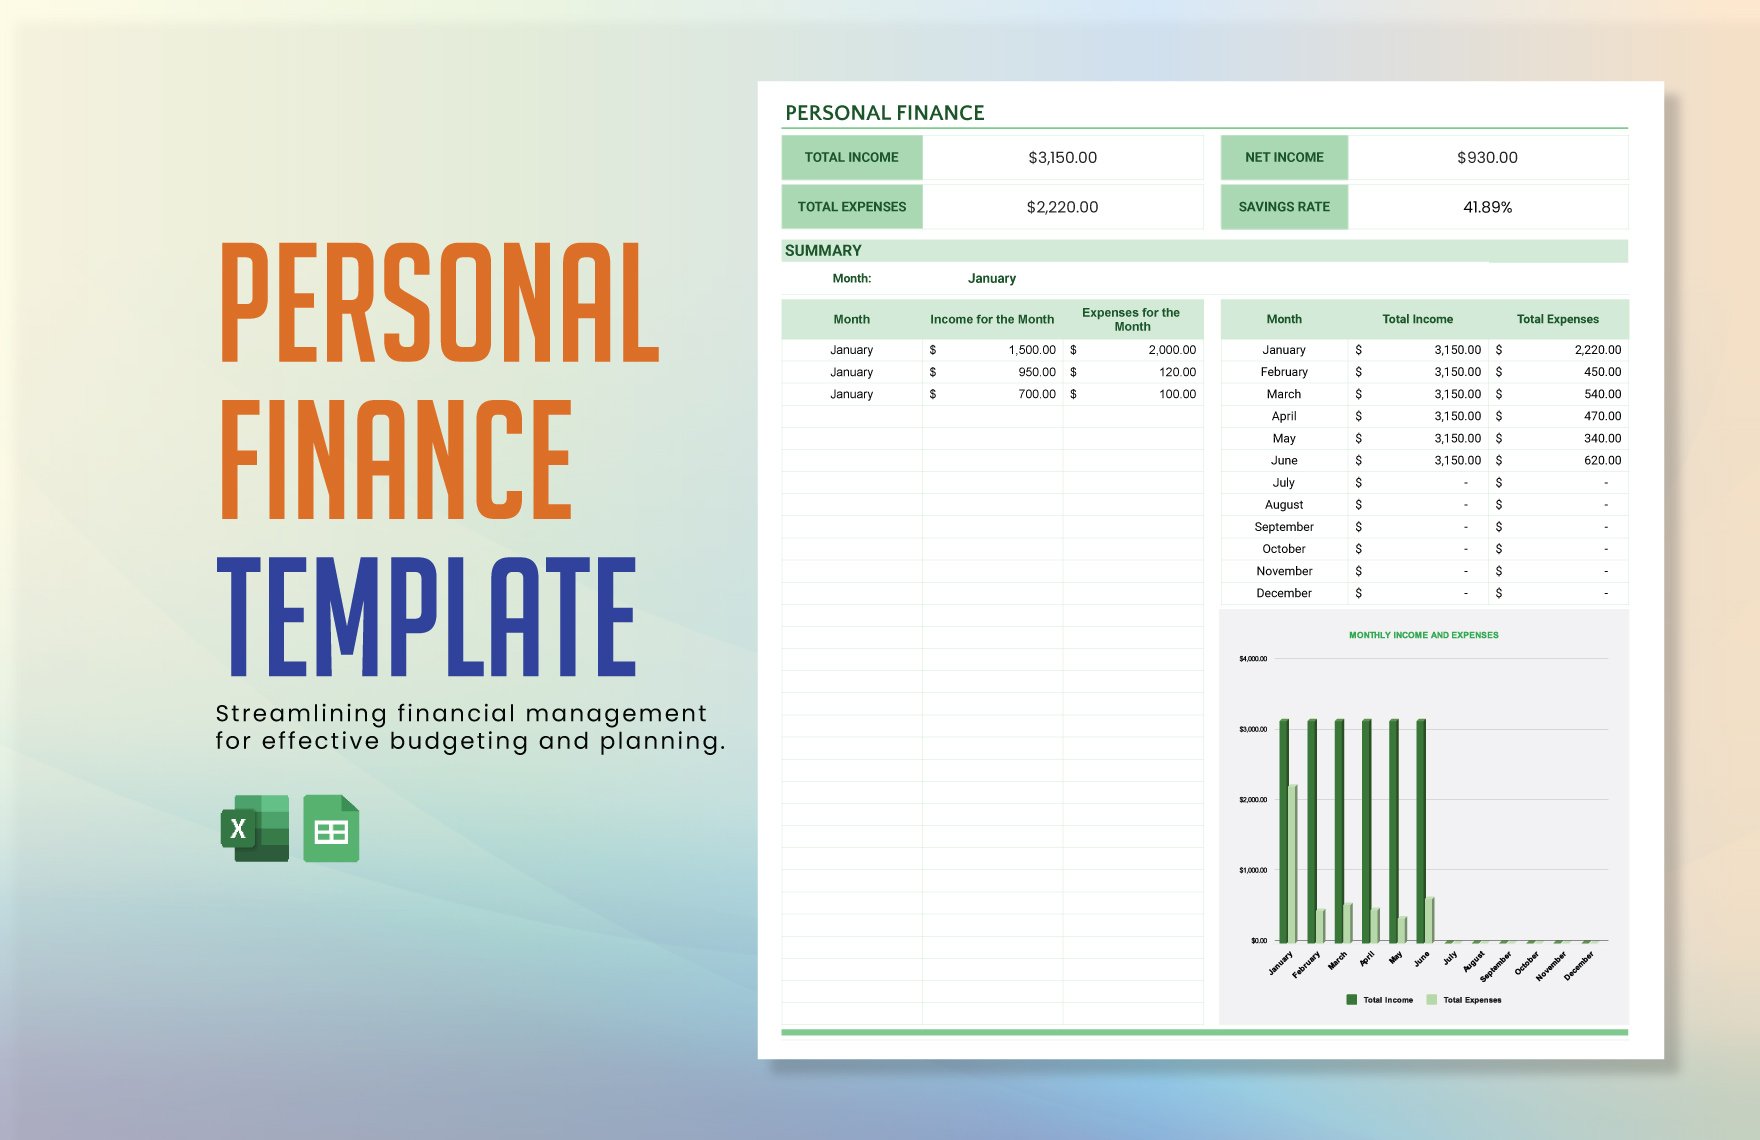 Personal Finance Template in Excel, Google Sheets